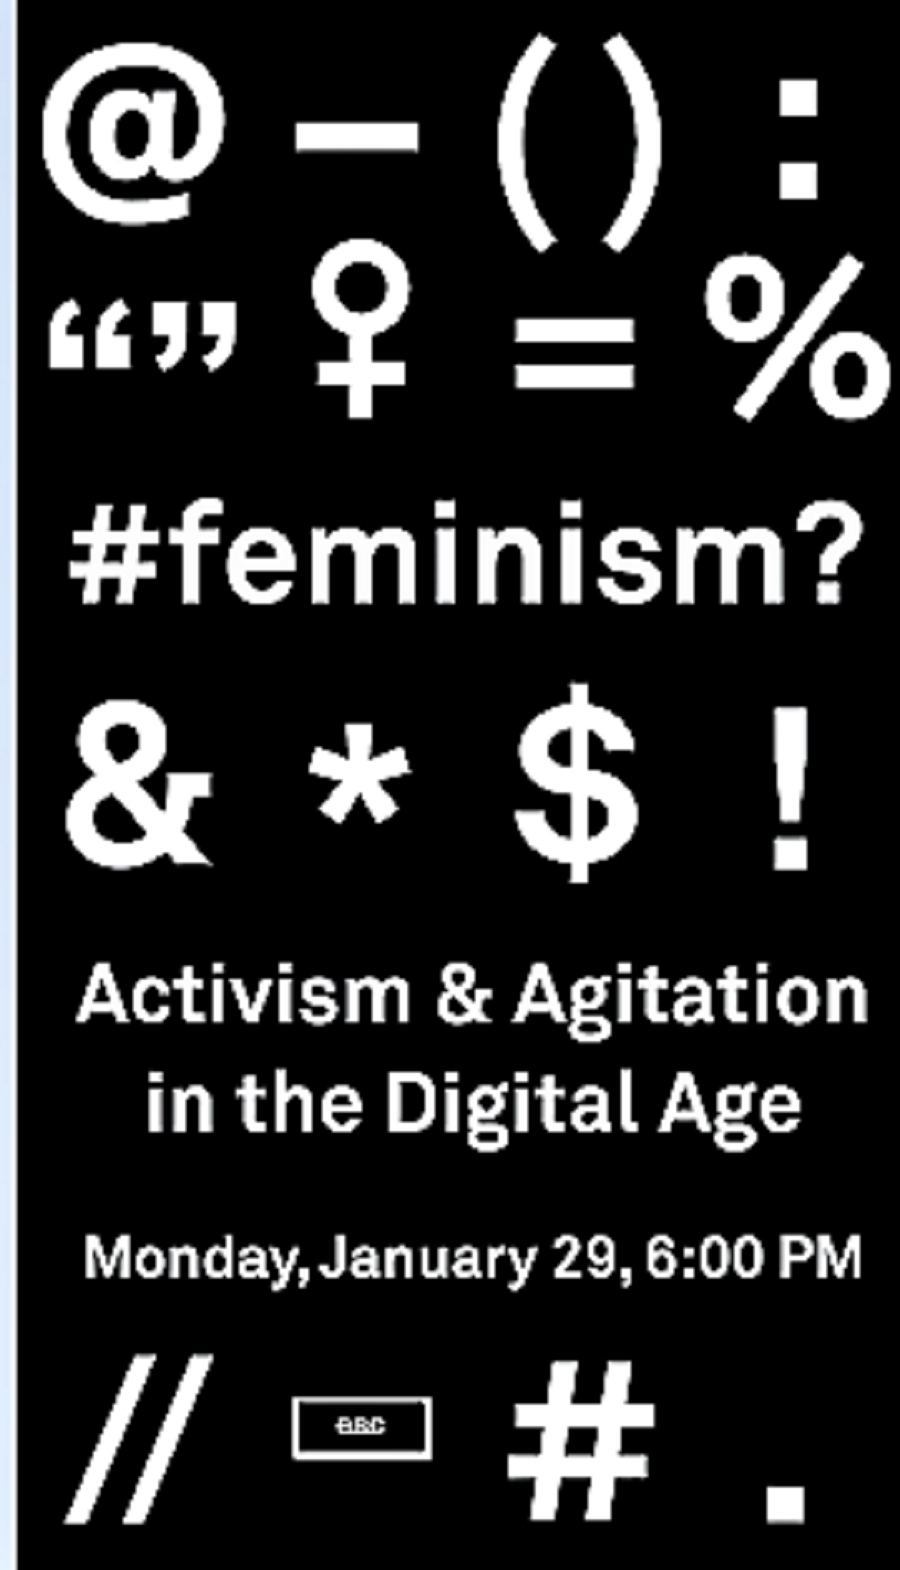 Feminism in the Digital Age: Tang Museum Hosts Innovate Thinkers Discussion Monday